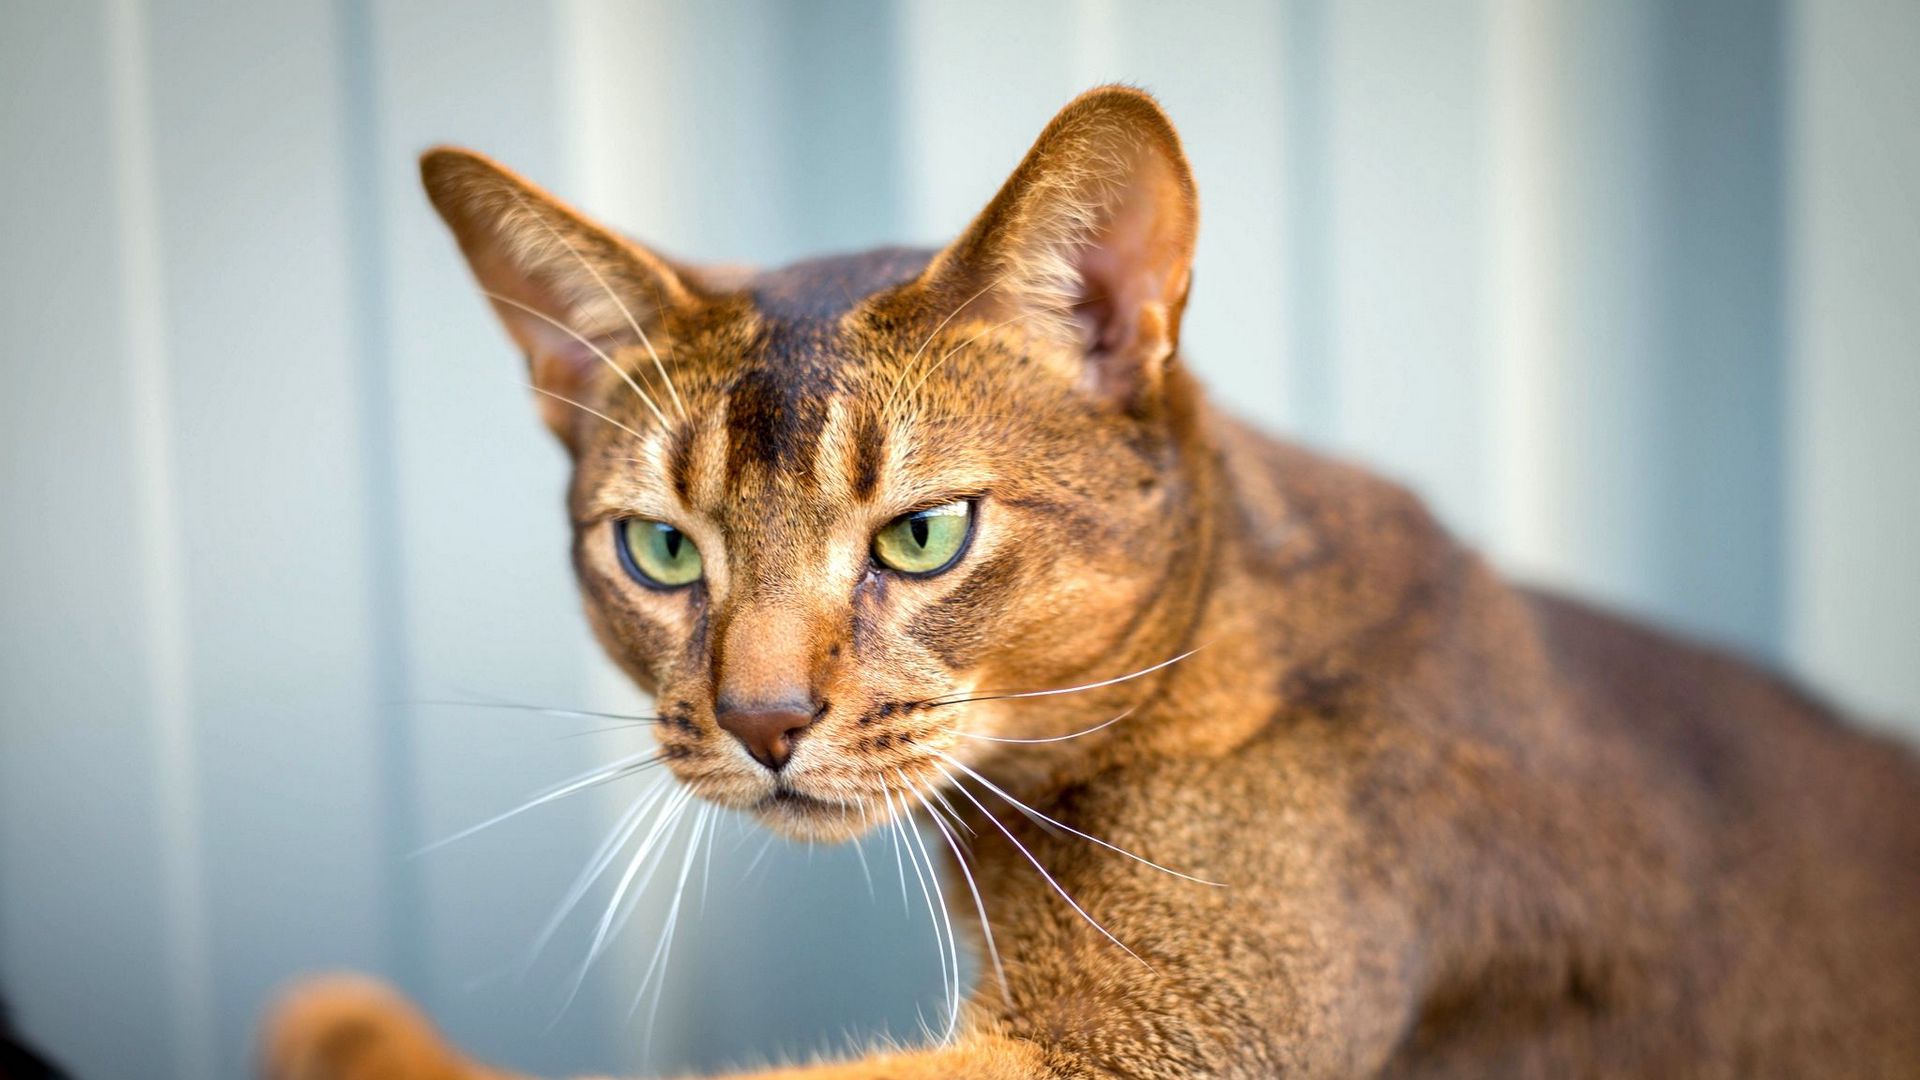 Download wallpaper 1920x1080 abyssinian cat, cat, face full hd, hdtv, fhd, 1080p HD background